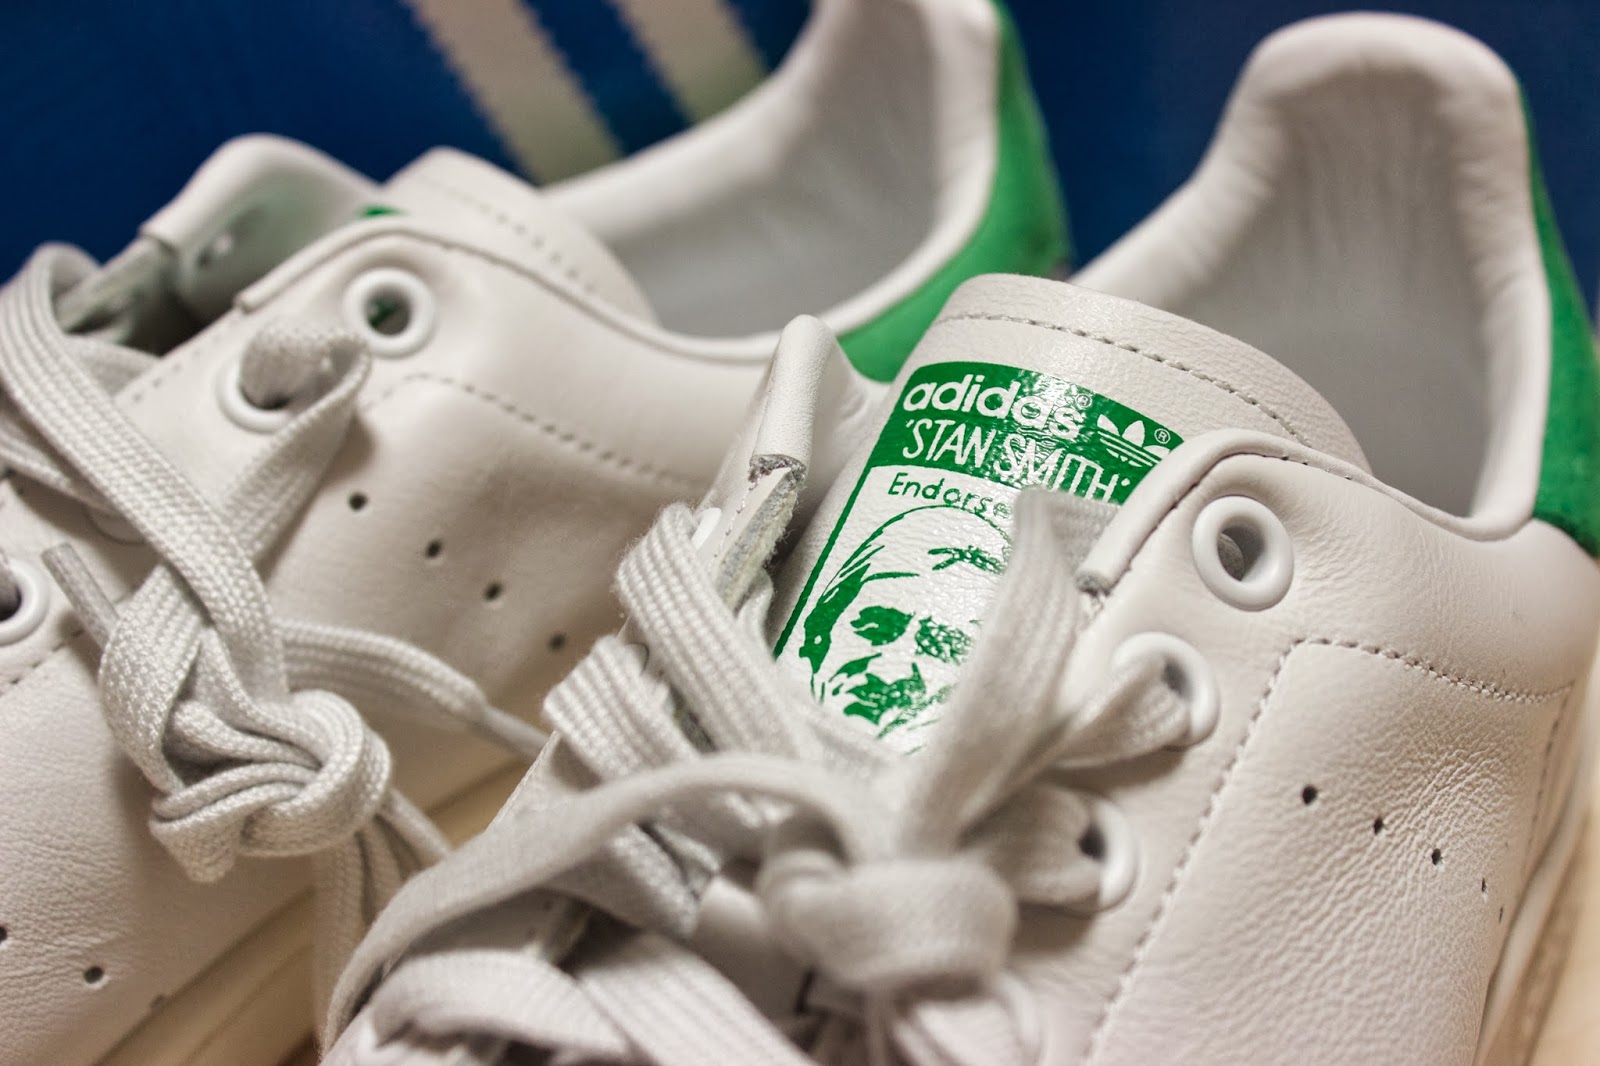 Goodbye, Our Pastels Badges さようならパステルズ・バッヂ: adidas Stan Smith 2014